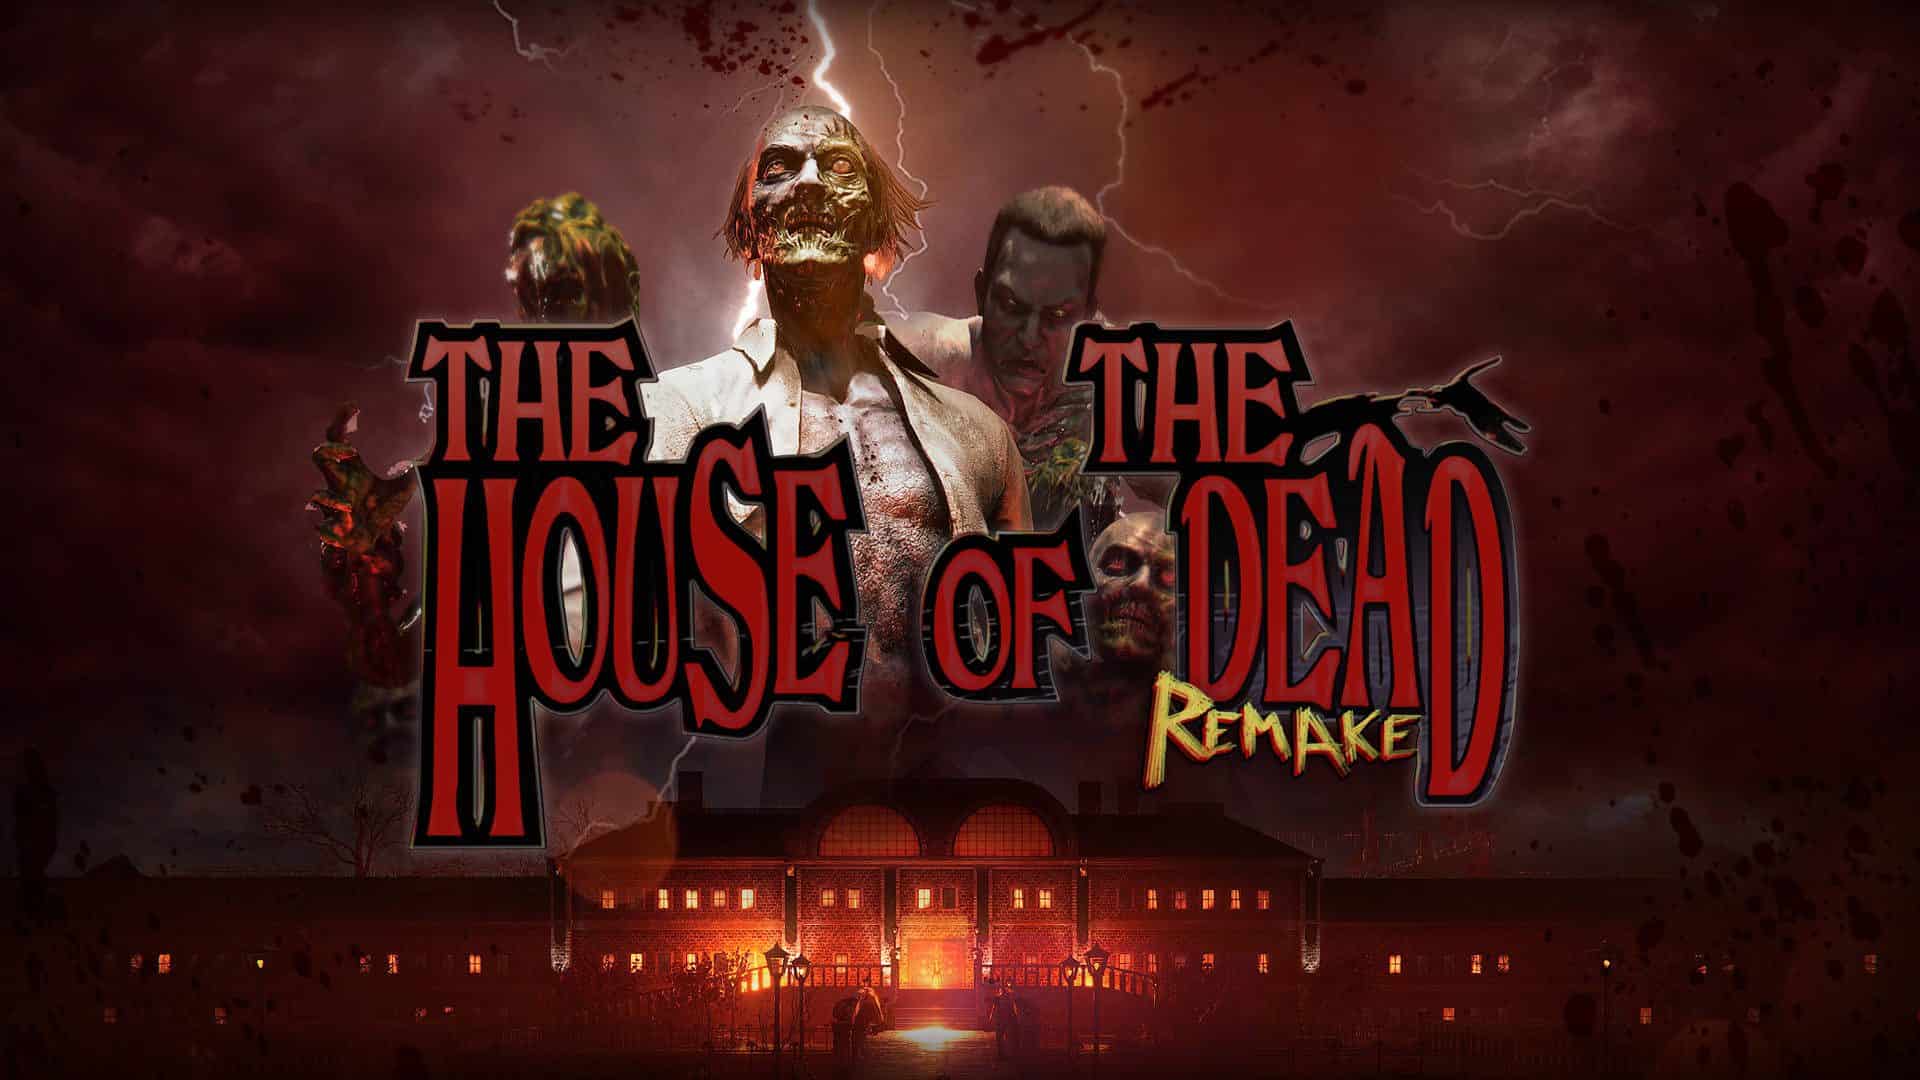 The House of the Dead: Remake game poster